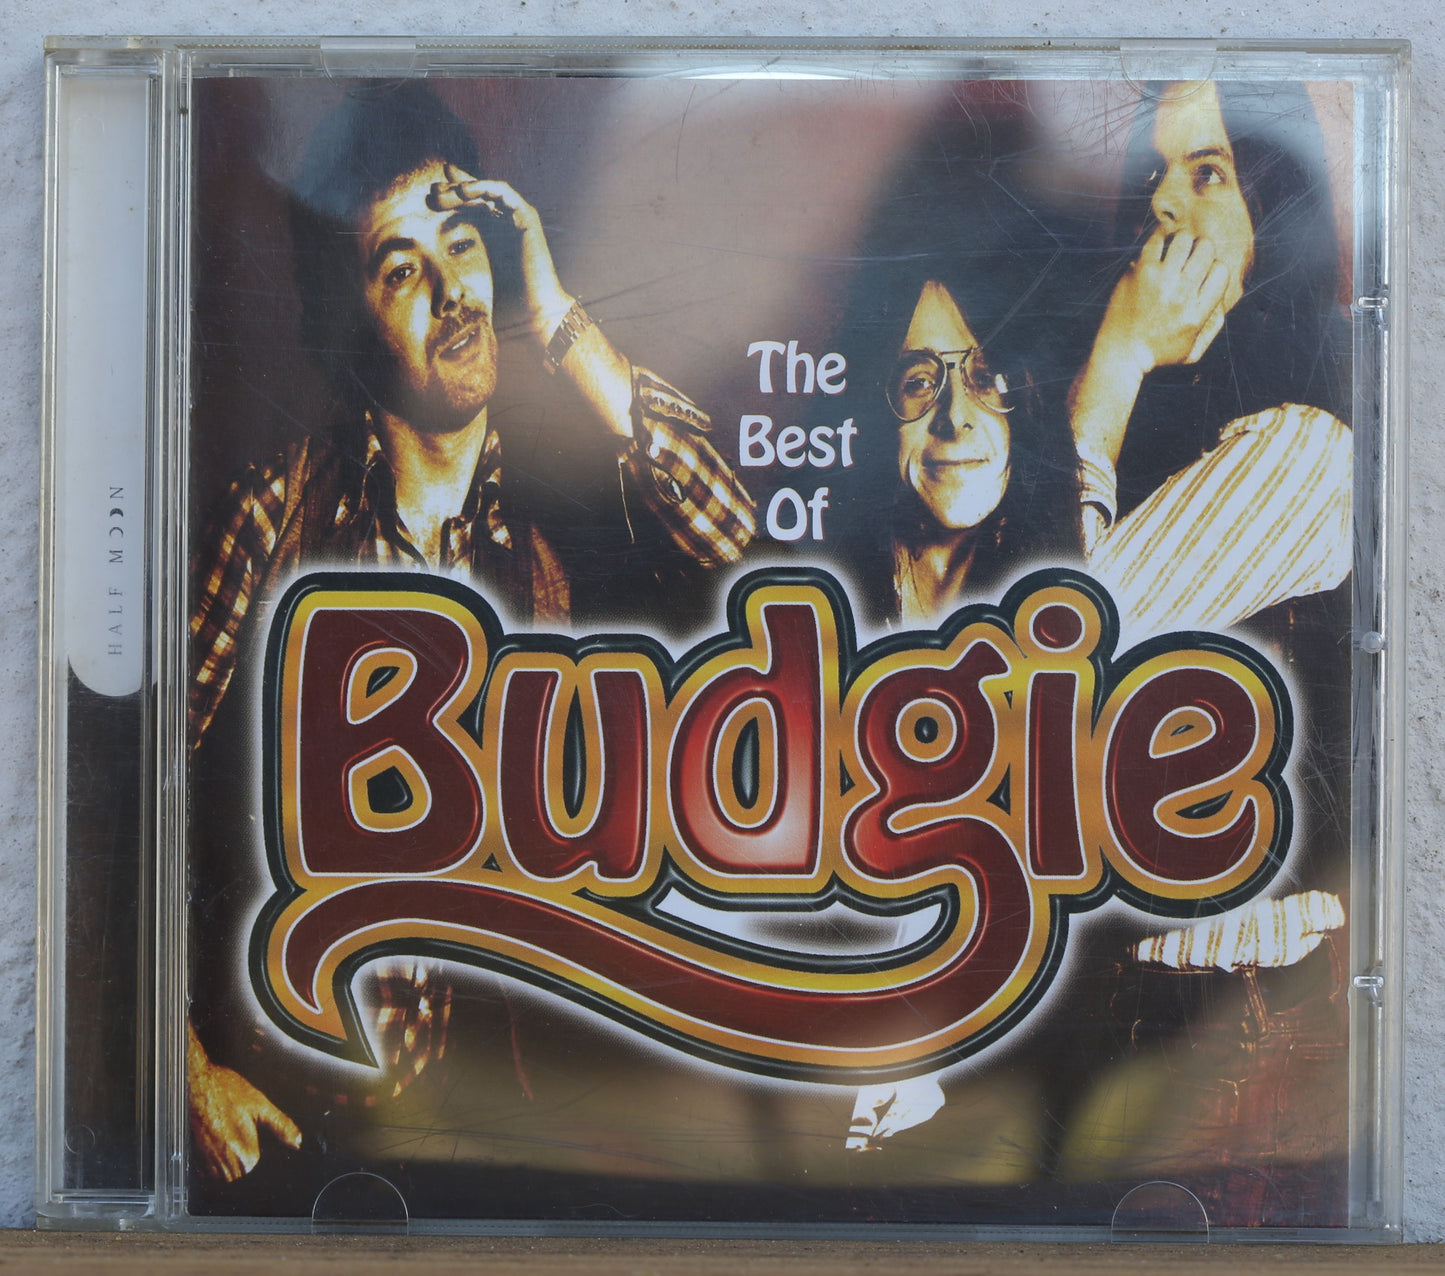 Budgie - The very best of budgie